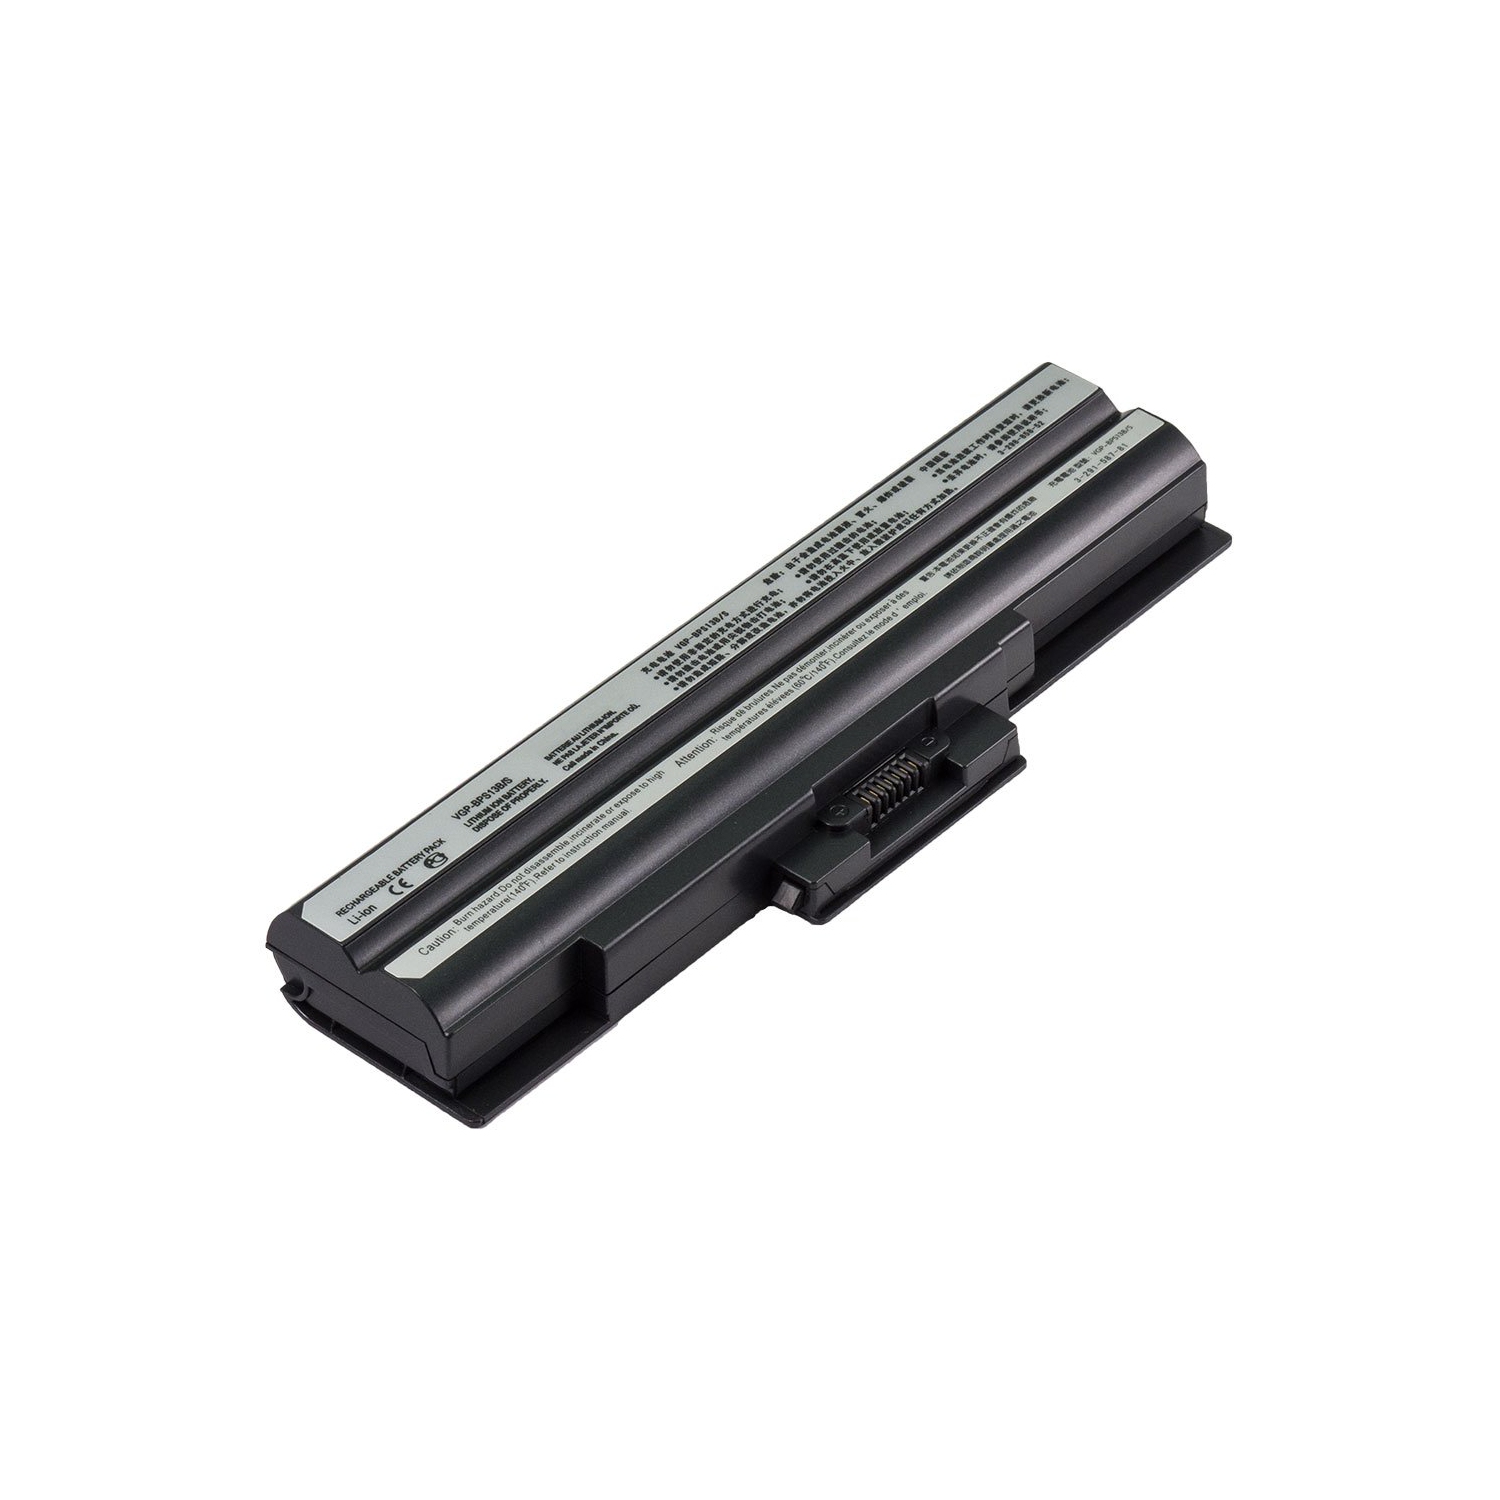 Laptop Battery Replacement for Sony VAIO VGN-FW298Y, VGP-BPL13, VGP-BPS13/Q, VGP-BPS13A/B, VGP-BPS13A/S, VGP-BPS13A